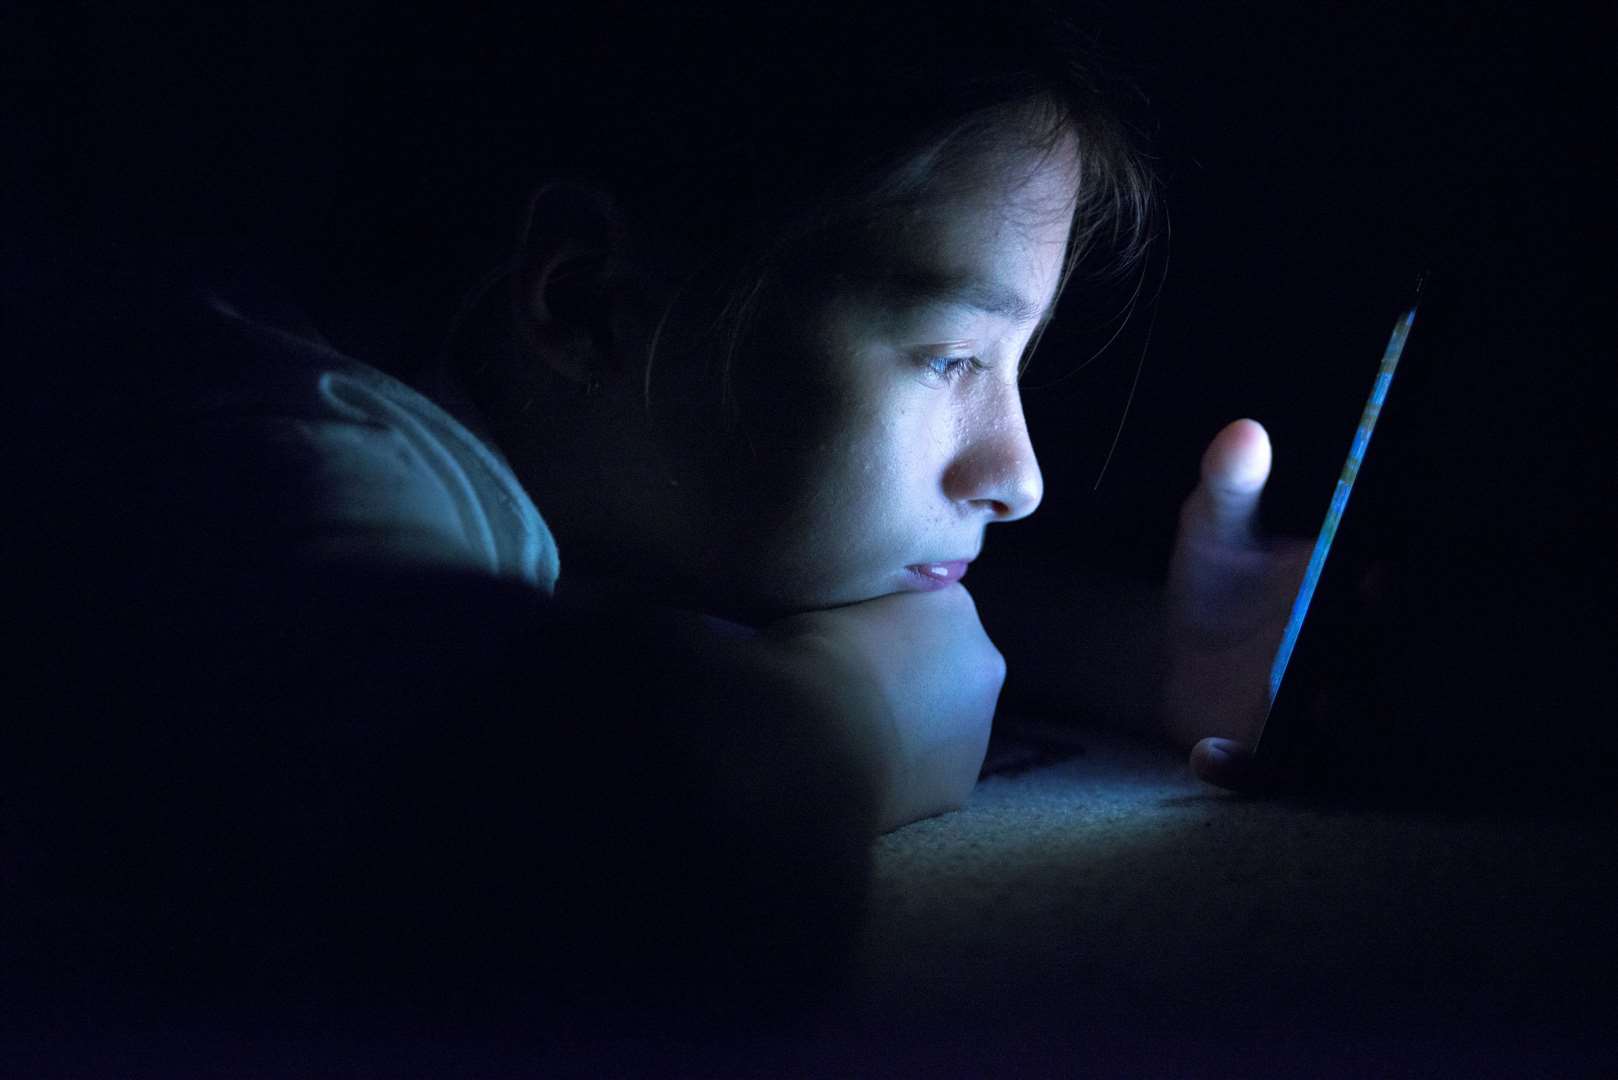 Kept amused by devices and the internet, growing numbers of teens are staying in. Image: iStock.